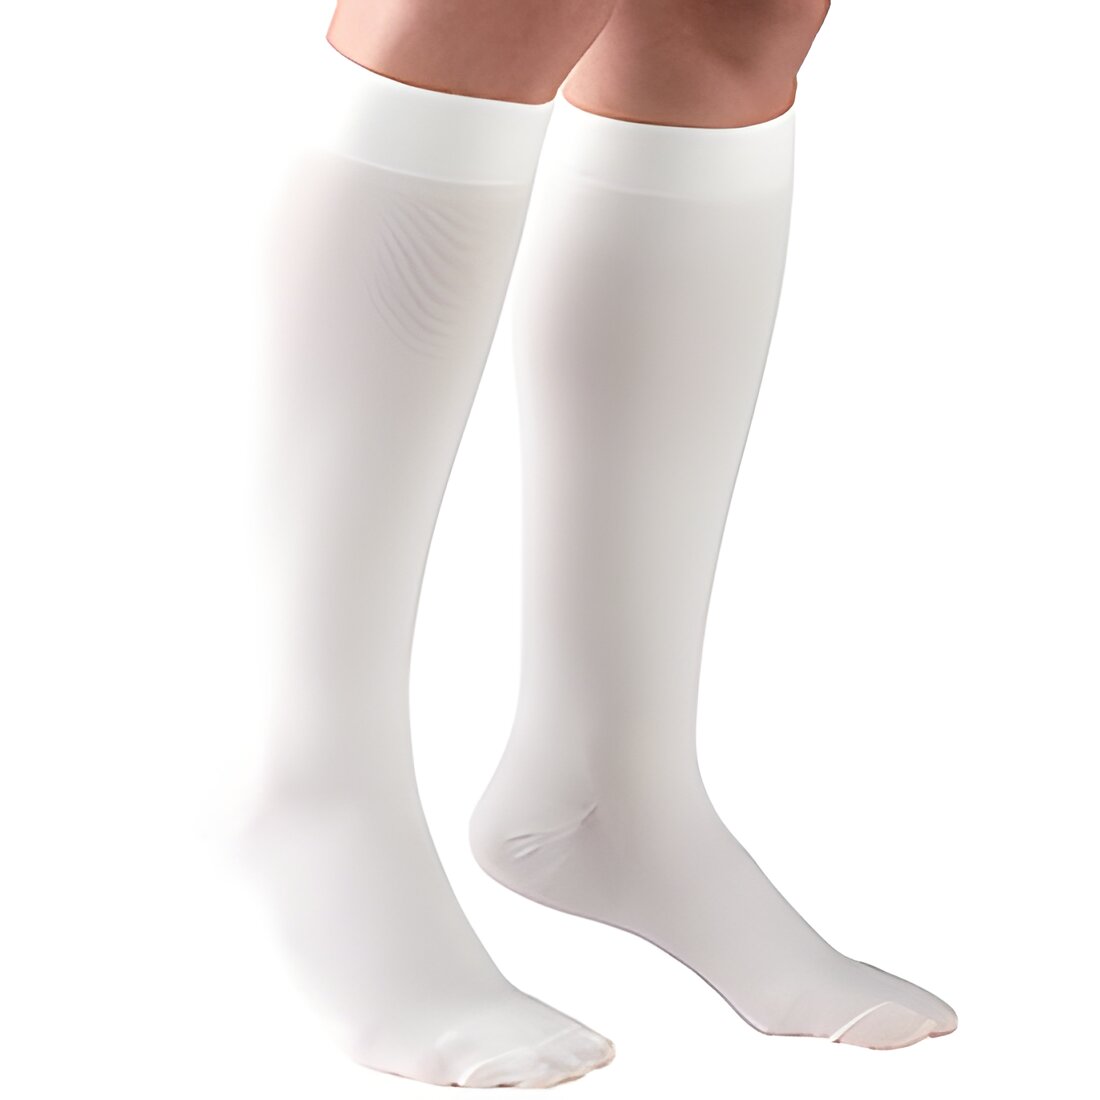 Free Compression Socks From Comprogear